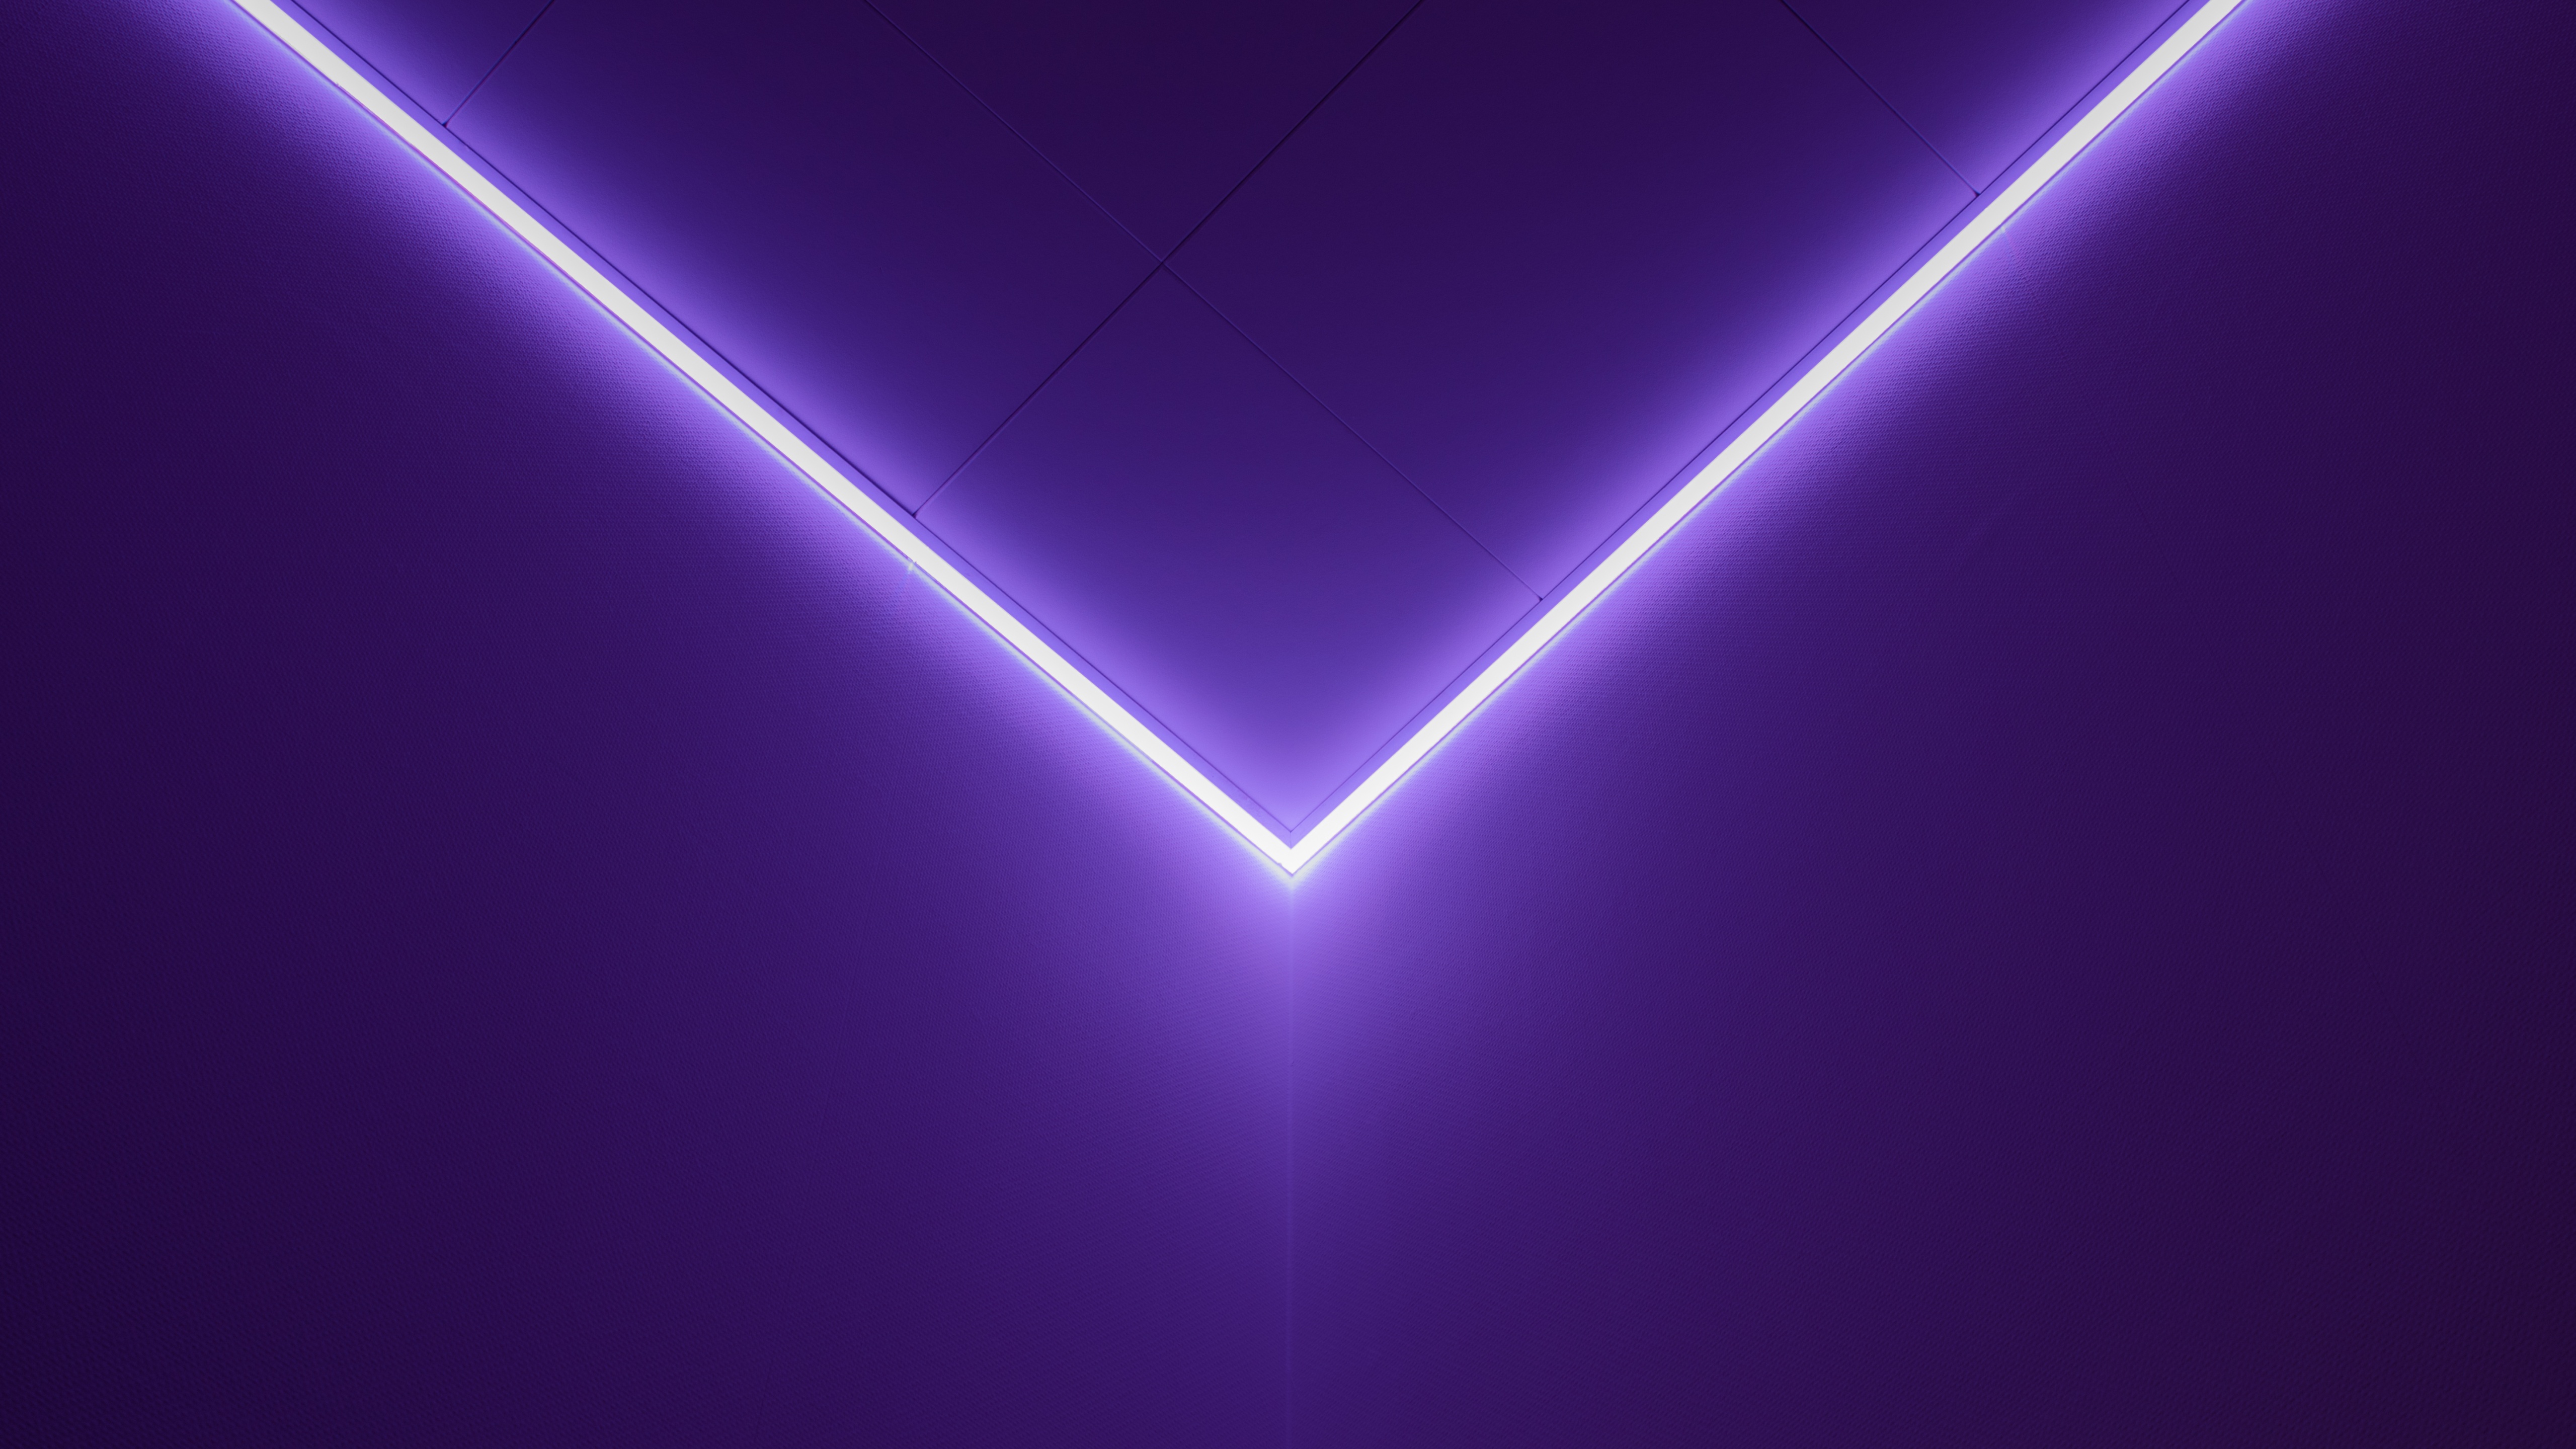 Flat violet color geometric triangle wallpaper Vector Image